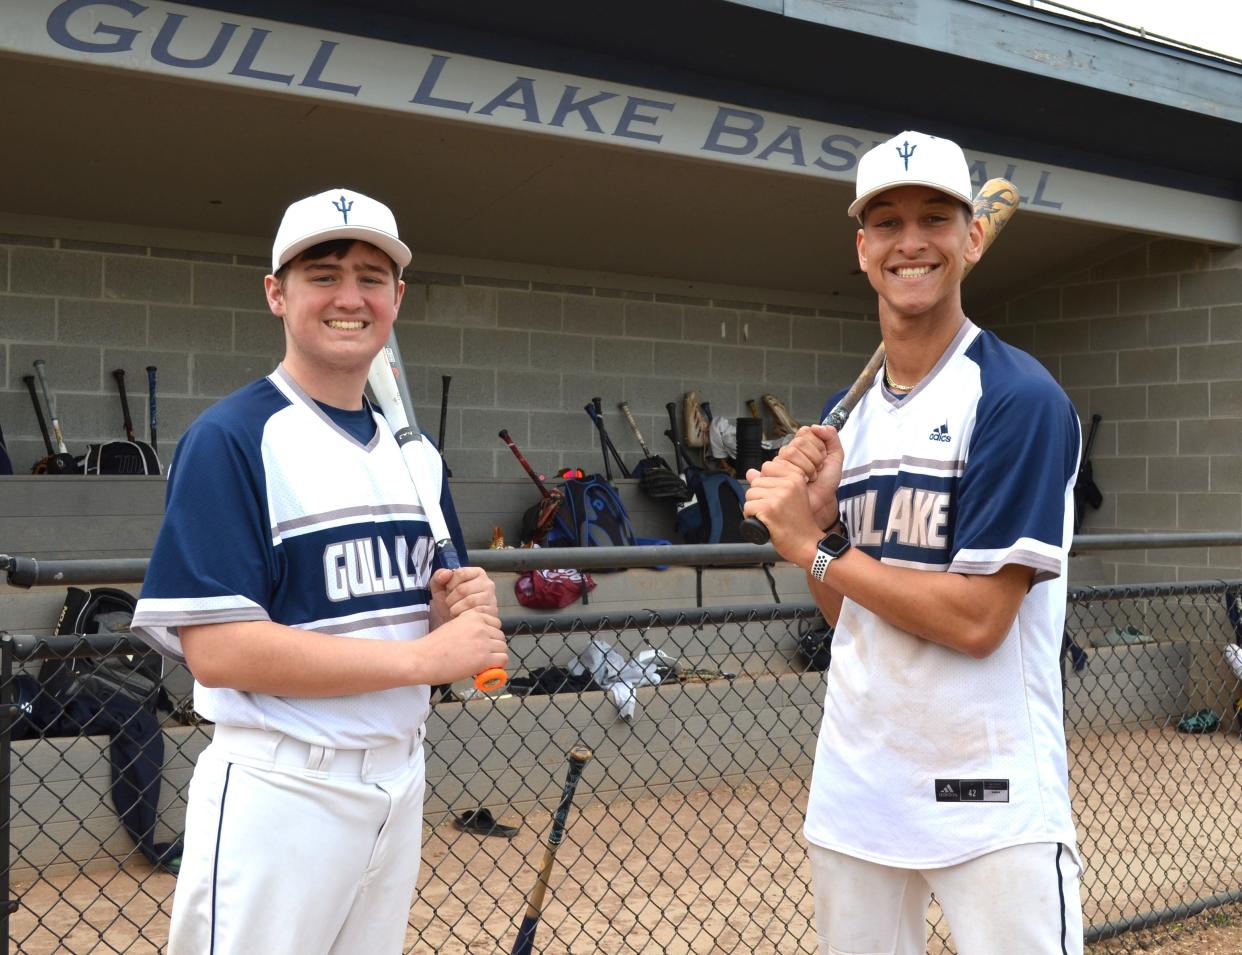 The Gull Lake baseball team has had two players diagnosed with cancer in, from left, Isaiah Walters and Julian Harris. Because of that, the baseball and softball programs are spearheading a fundraiser for the American Cancer Society as part of their games on May 11.